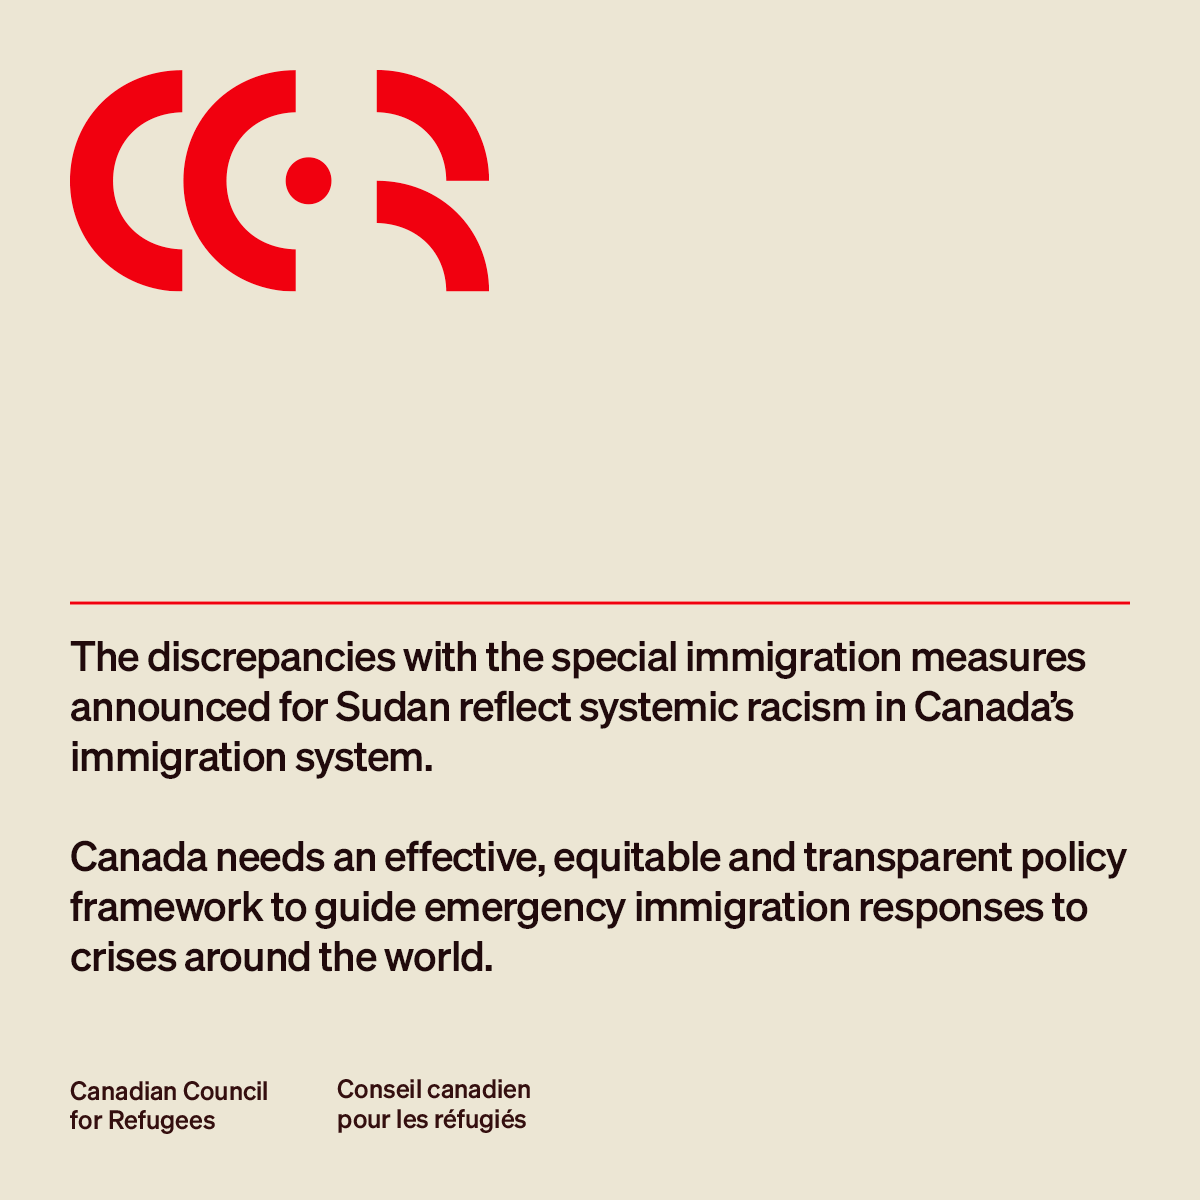 CCR welcomes immigration measures for those affected by the crisis in Sudan, but there are major shortcomings in Canada's response and the inequities are stark. See our response here: tinyurl.com/3d3d2n2f #cdnpoli